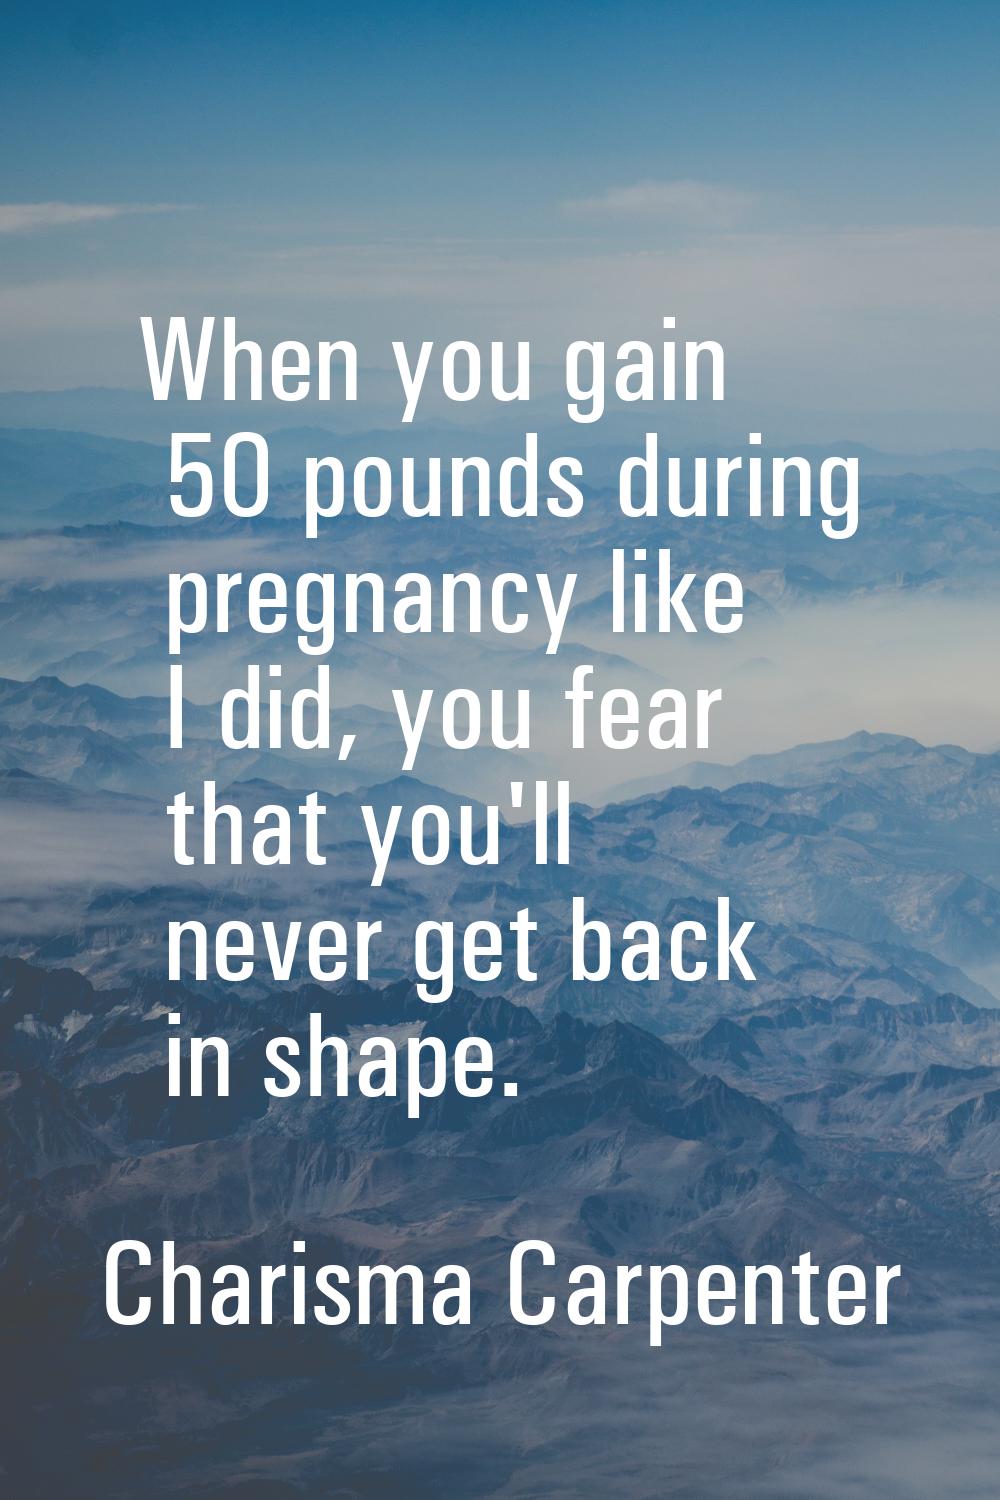 When you gain 50 pounds during pregnancy like I did, you fear that you'll never get back in shape.